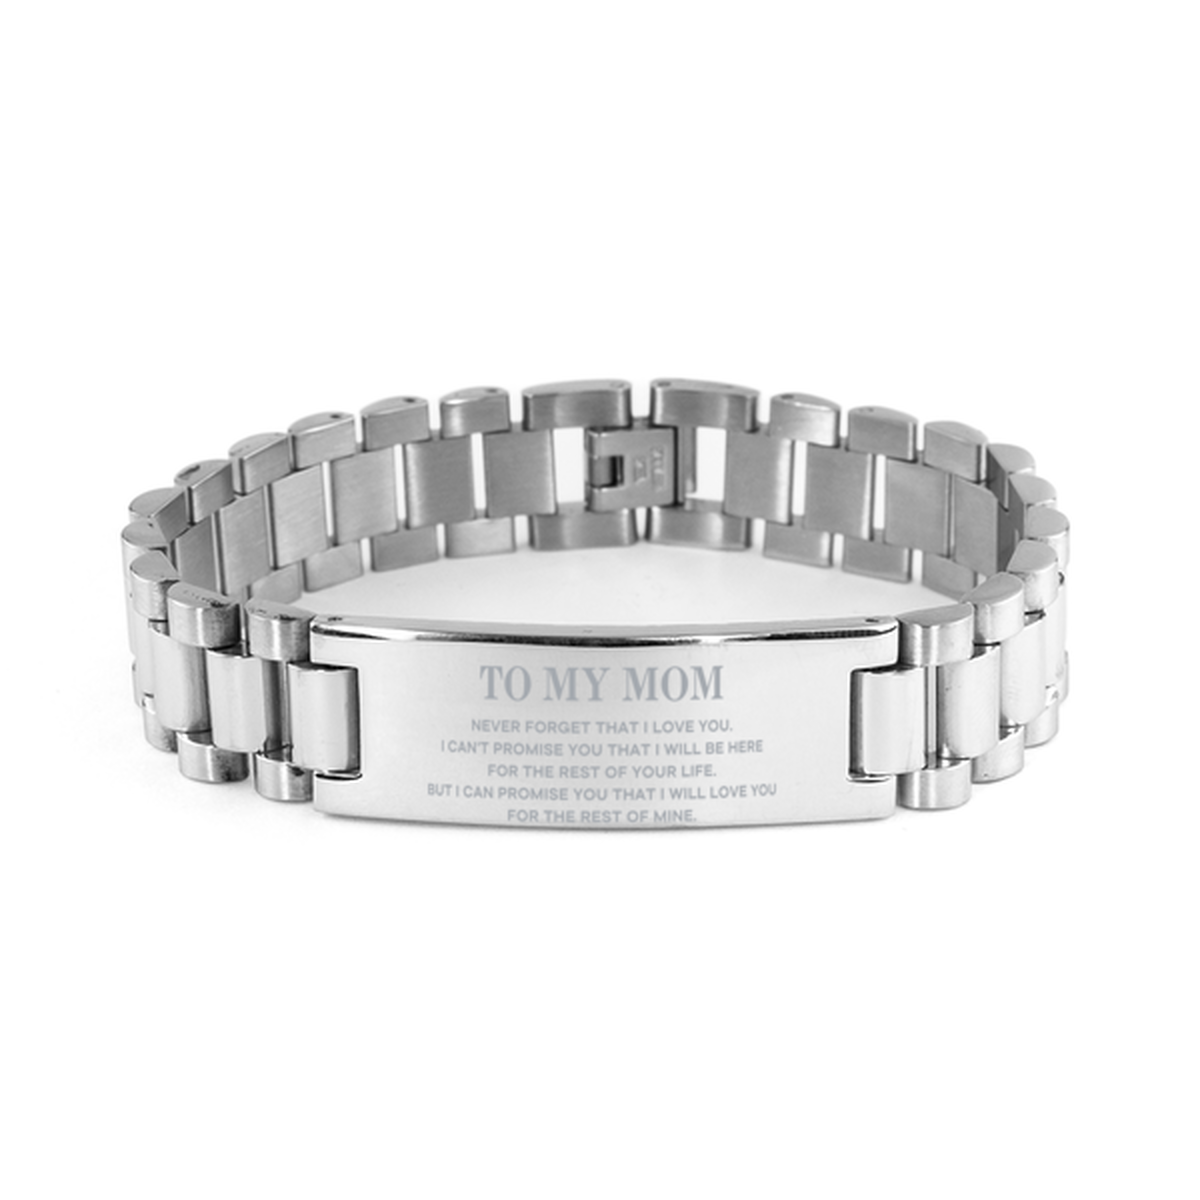 To My Mom Gifts, I will love you for the rest of mine, Love Mom Bracelet, Birthday Christmas Unique Ladder Stainless Steel Bracelet For Mom